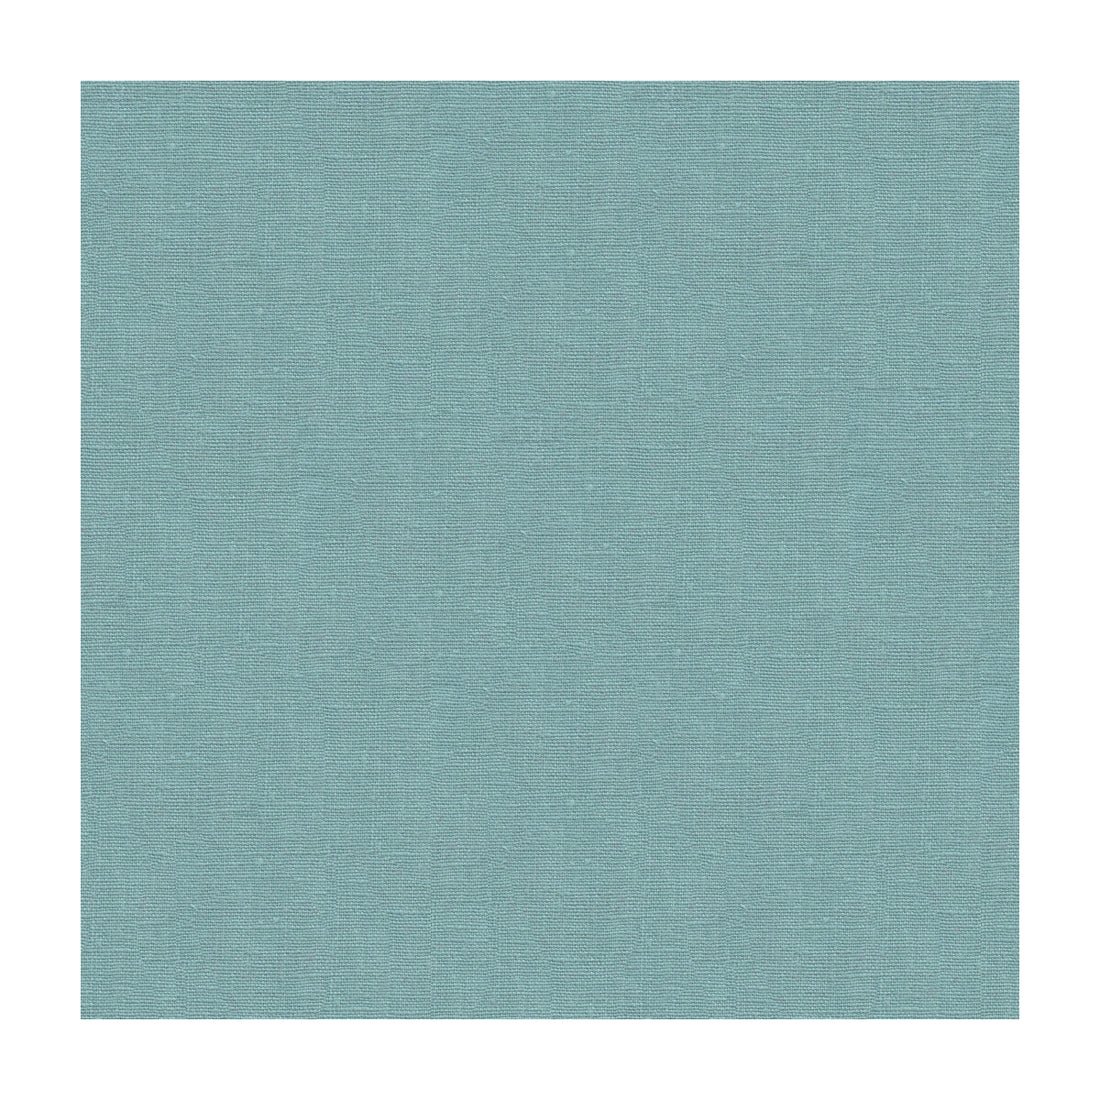 Oakland fabric in aqua color - pattern PF50407.725.0 - by Baker Lifestyle in the Perfect Plains collection